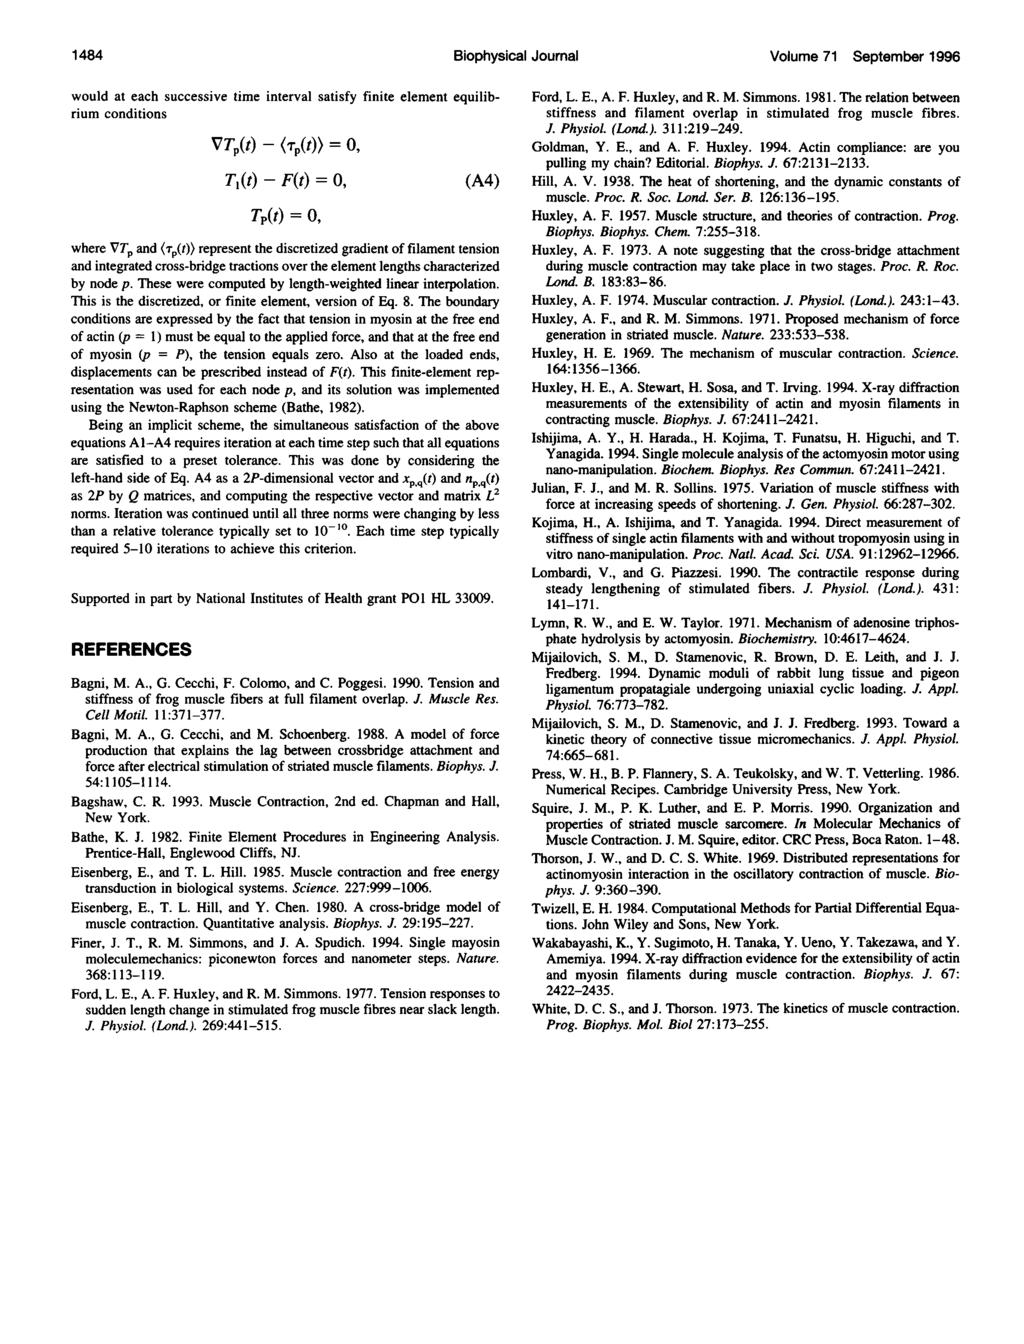 1484 Biophysical Journal Volume 71 September 1996 would at each successive time interval satisfy finite element equilibrium conditions VTp(t) - (p(t)) =, T1(t) - F(t) =, Tp(t) = O, (A4) where VTp and